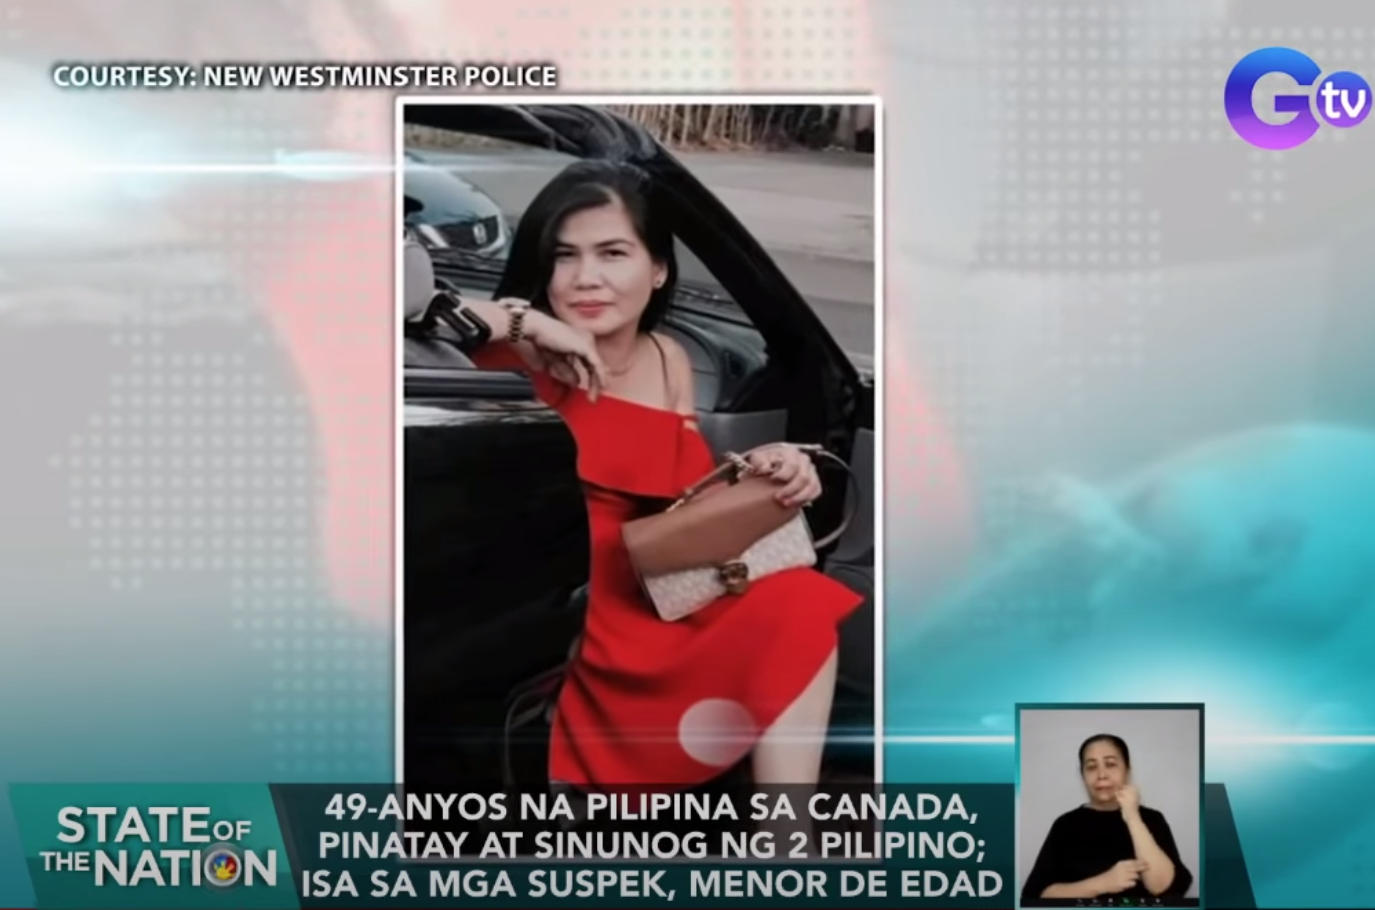 Pinay killed in canada